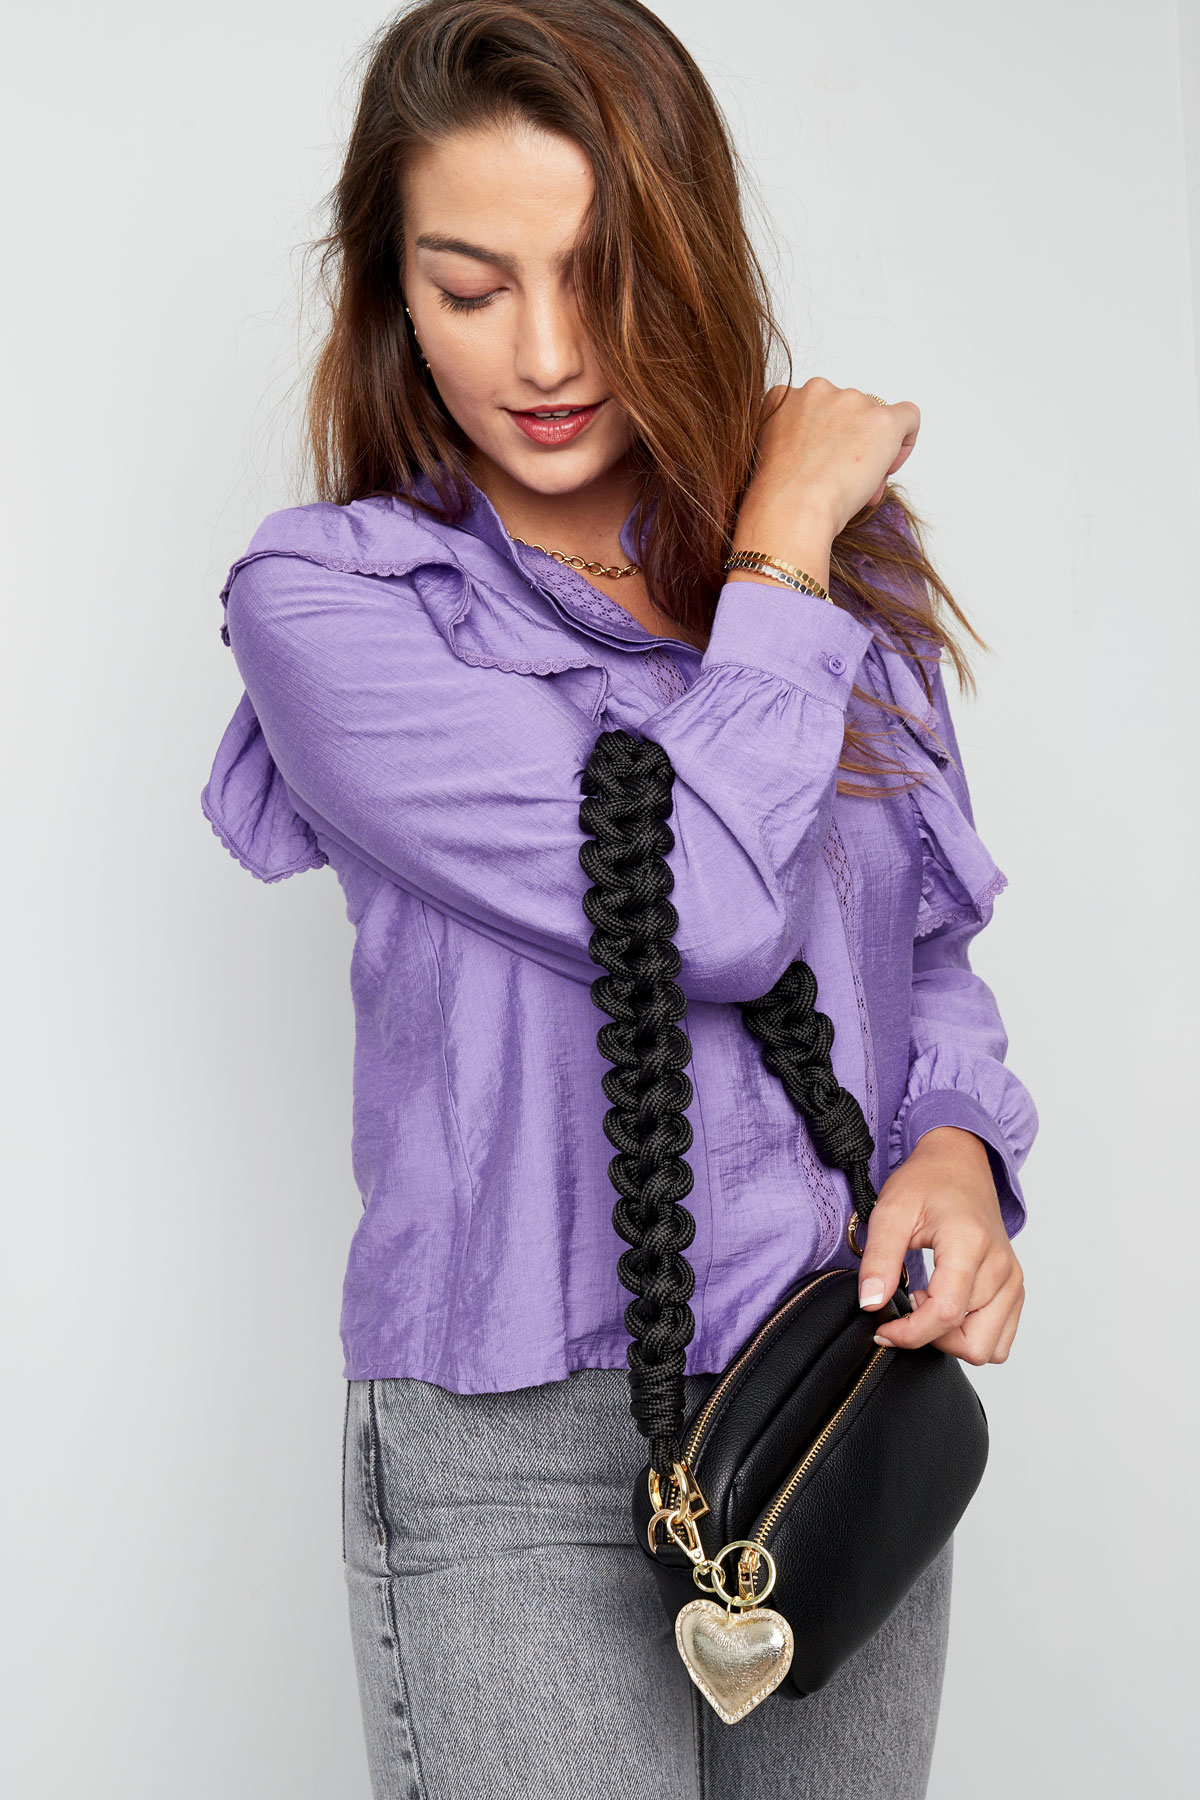 Braided bag strap purple Picture4